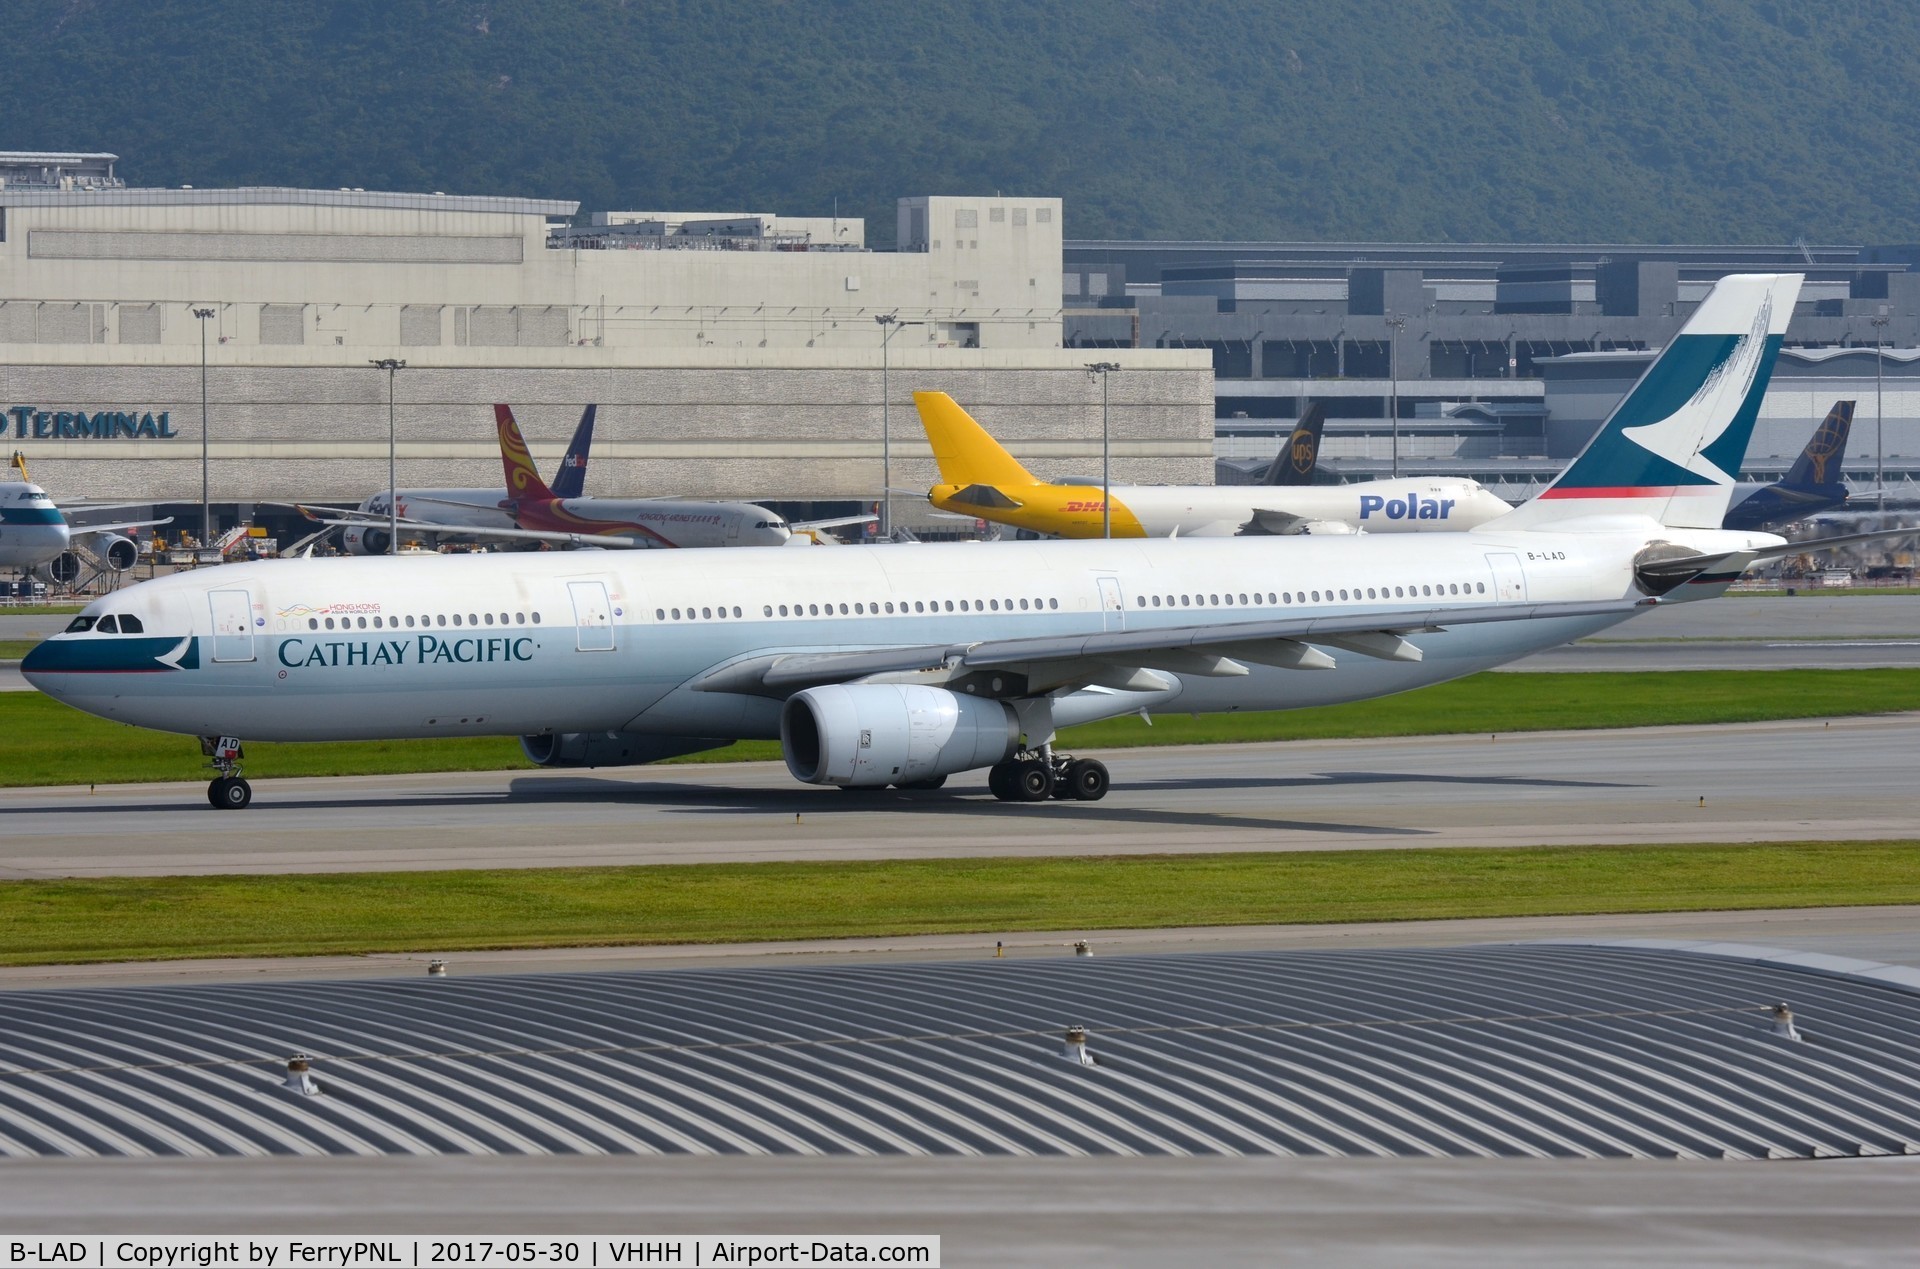 B-LAD, 2006 Airbus A330-343X C/N 776, Cathay Pacific A333